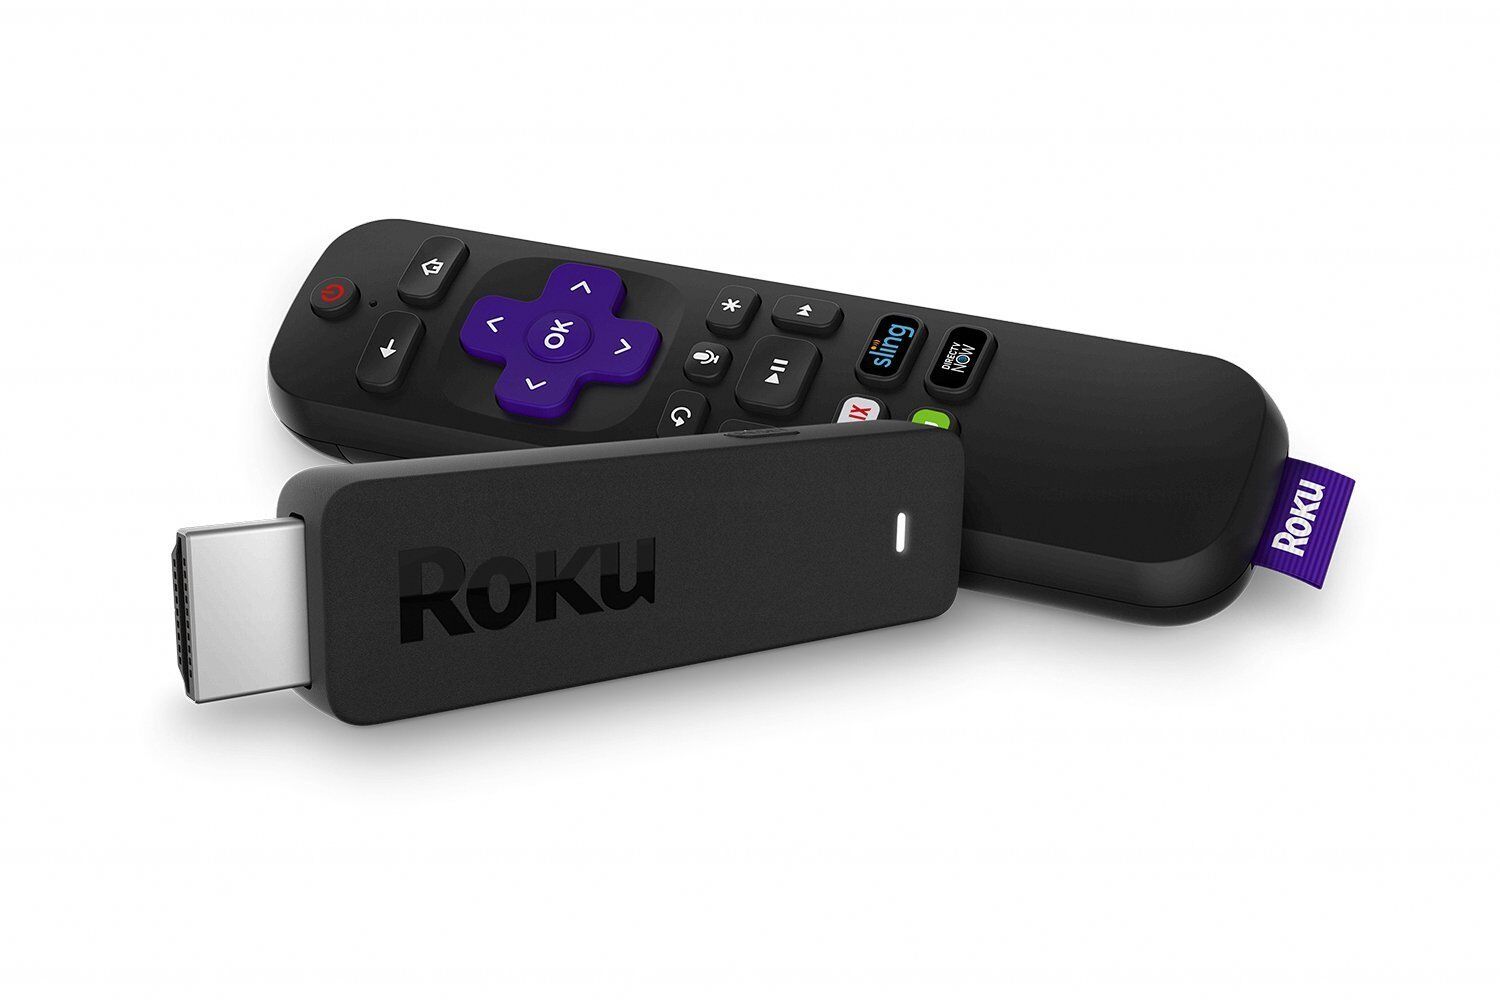 Roku Streaming Stick | Portable, Power-Packed Streaming Device with Voice Remote